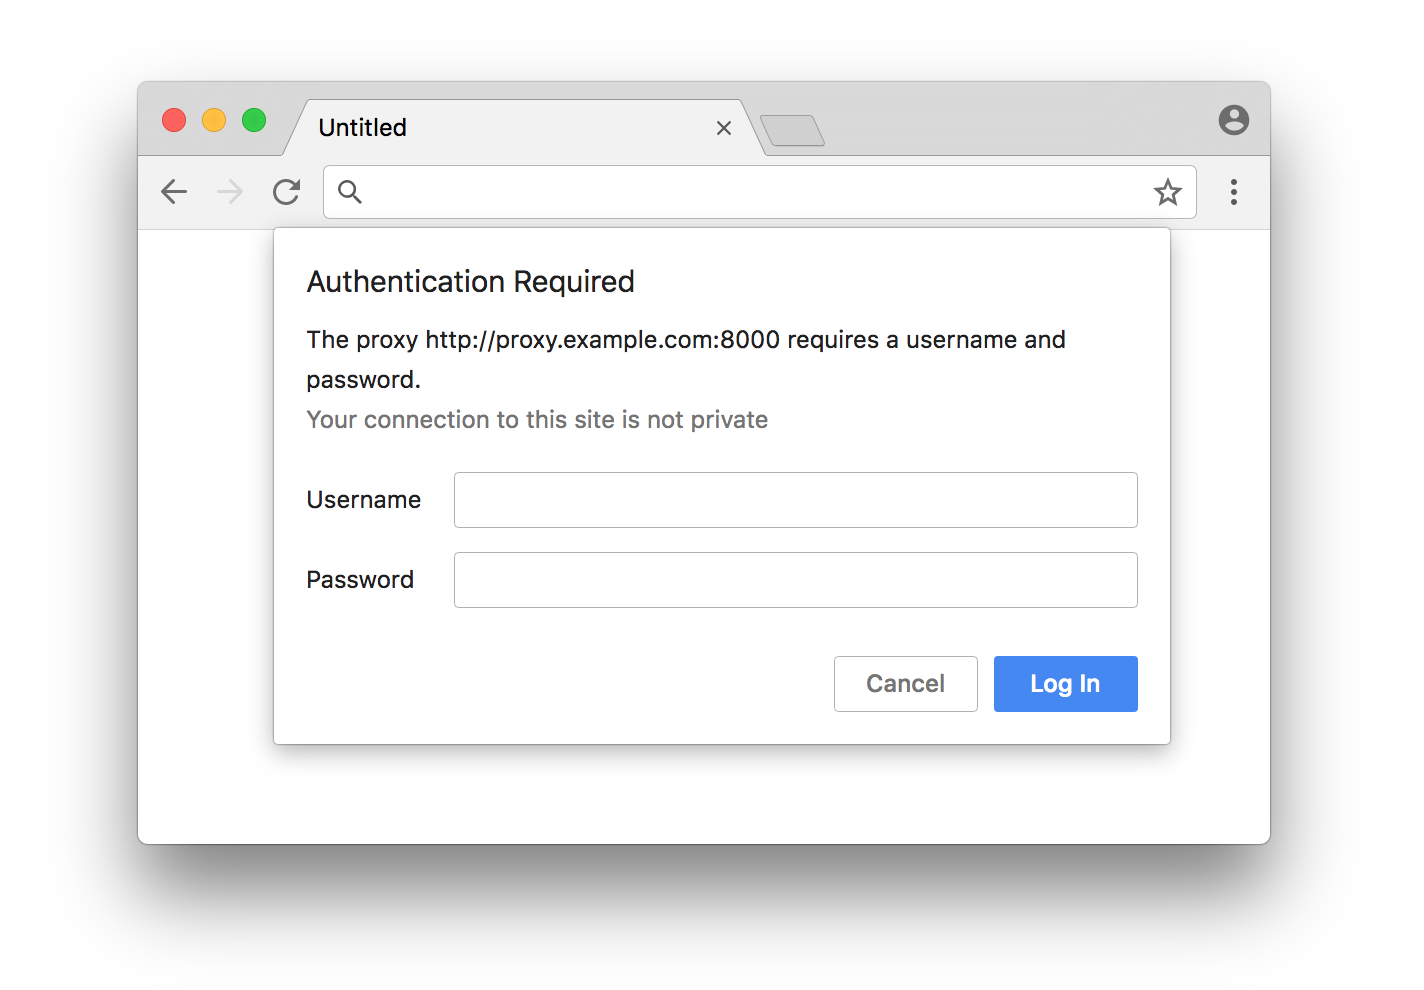 screenshot of a pop-up window in a browser informing that authentication for a proxy server is required